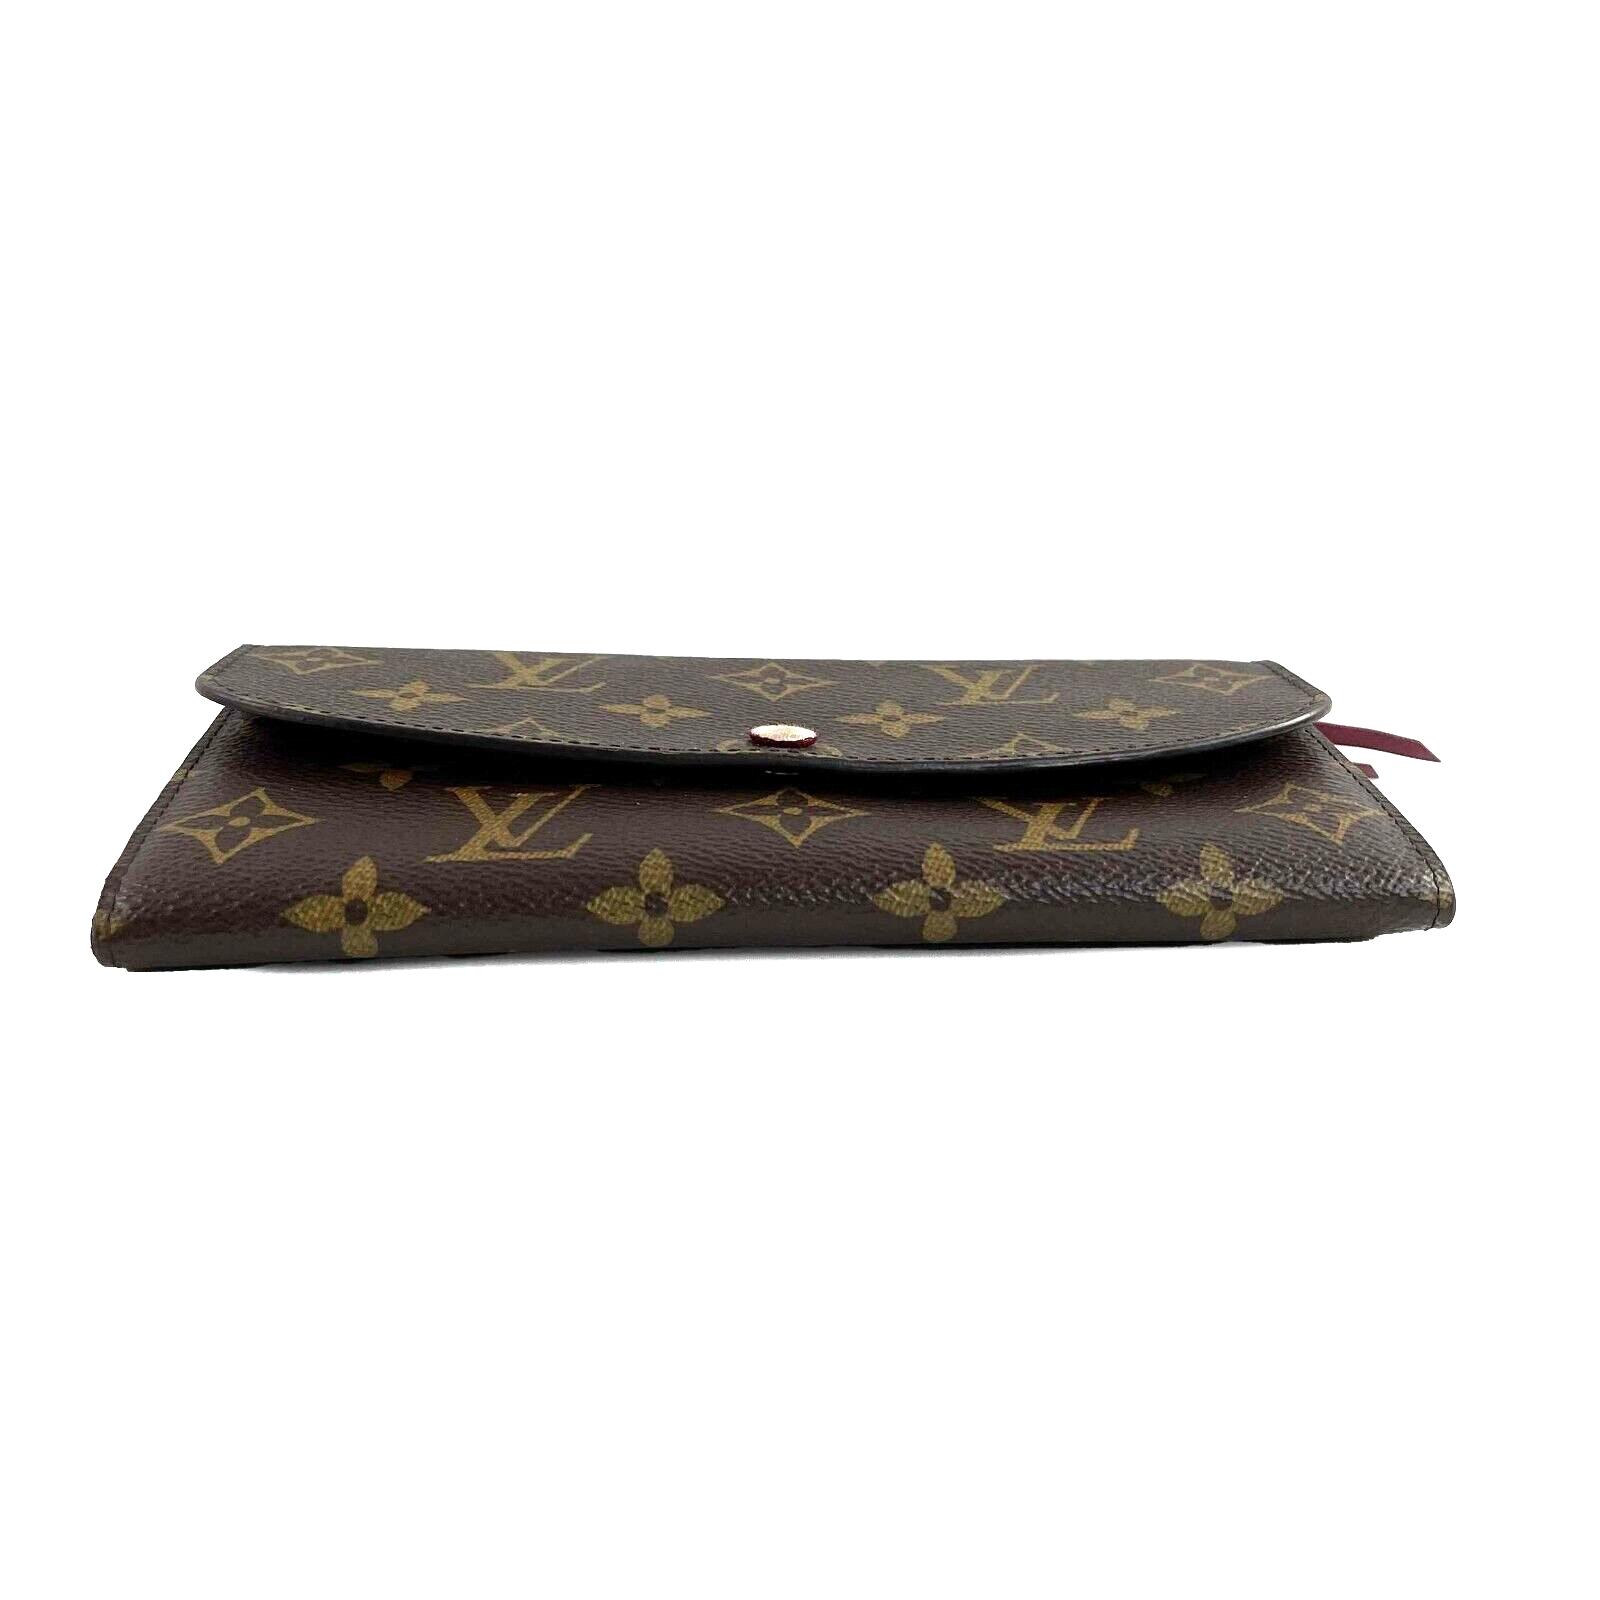 Louis Vuitton Emilie Wallet with red accents